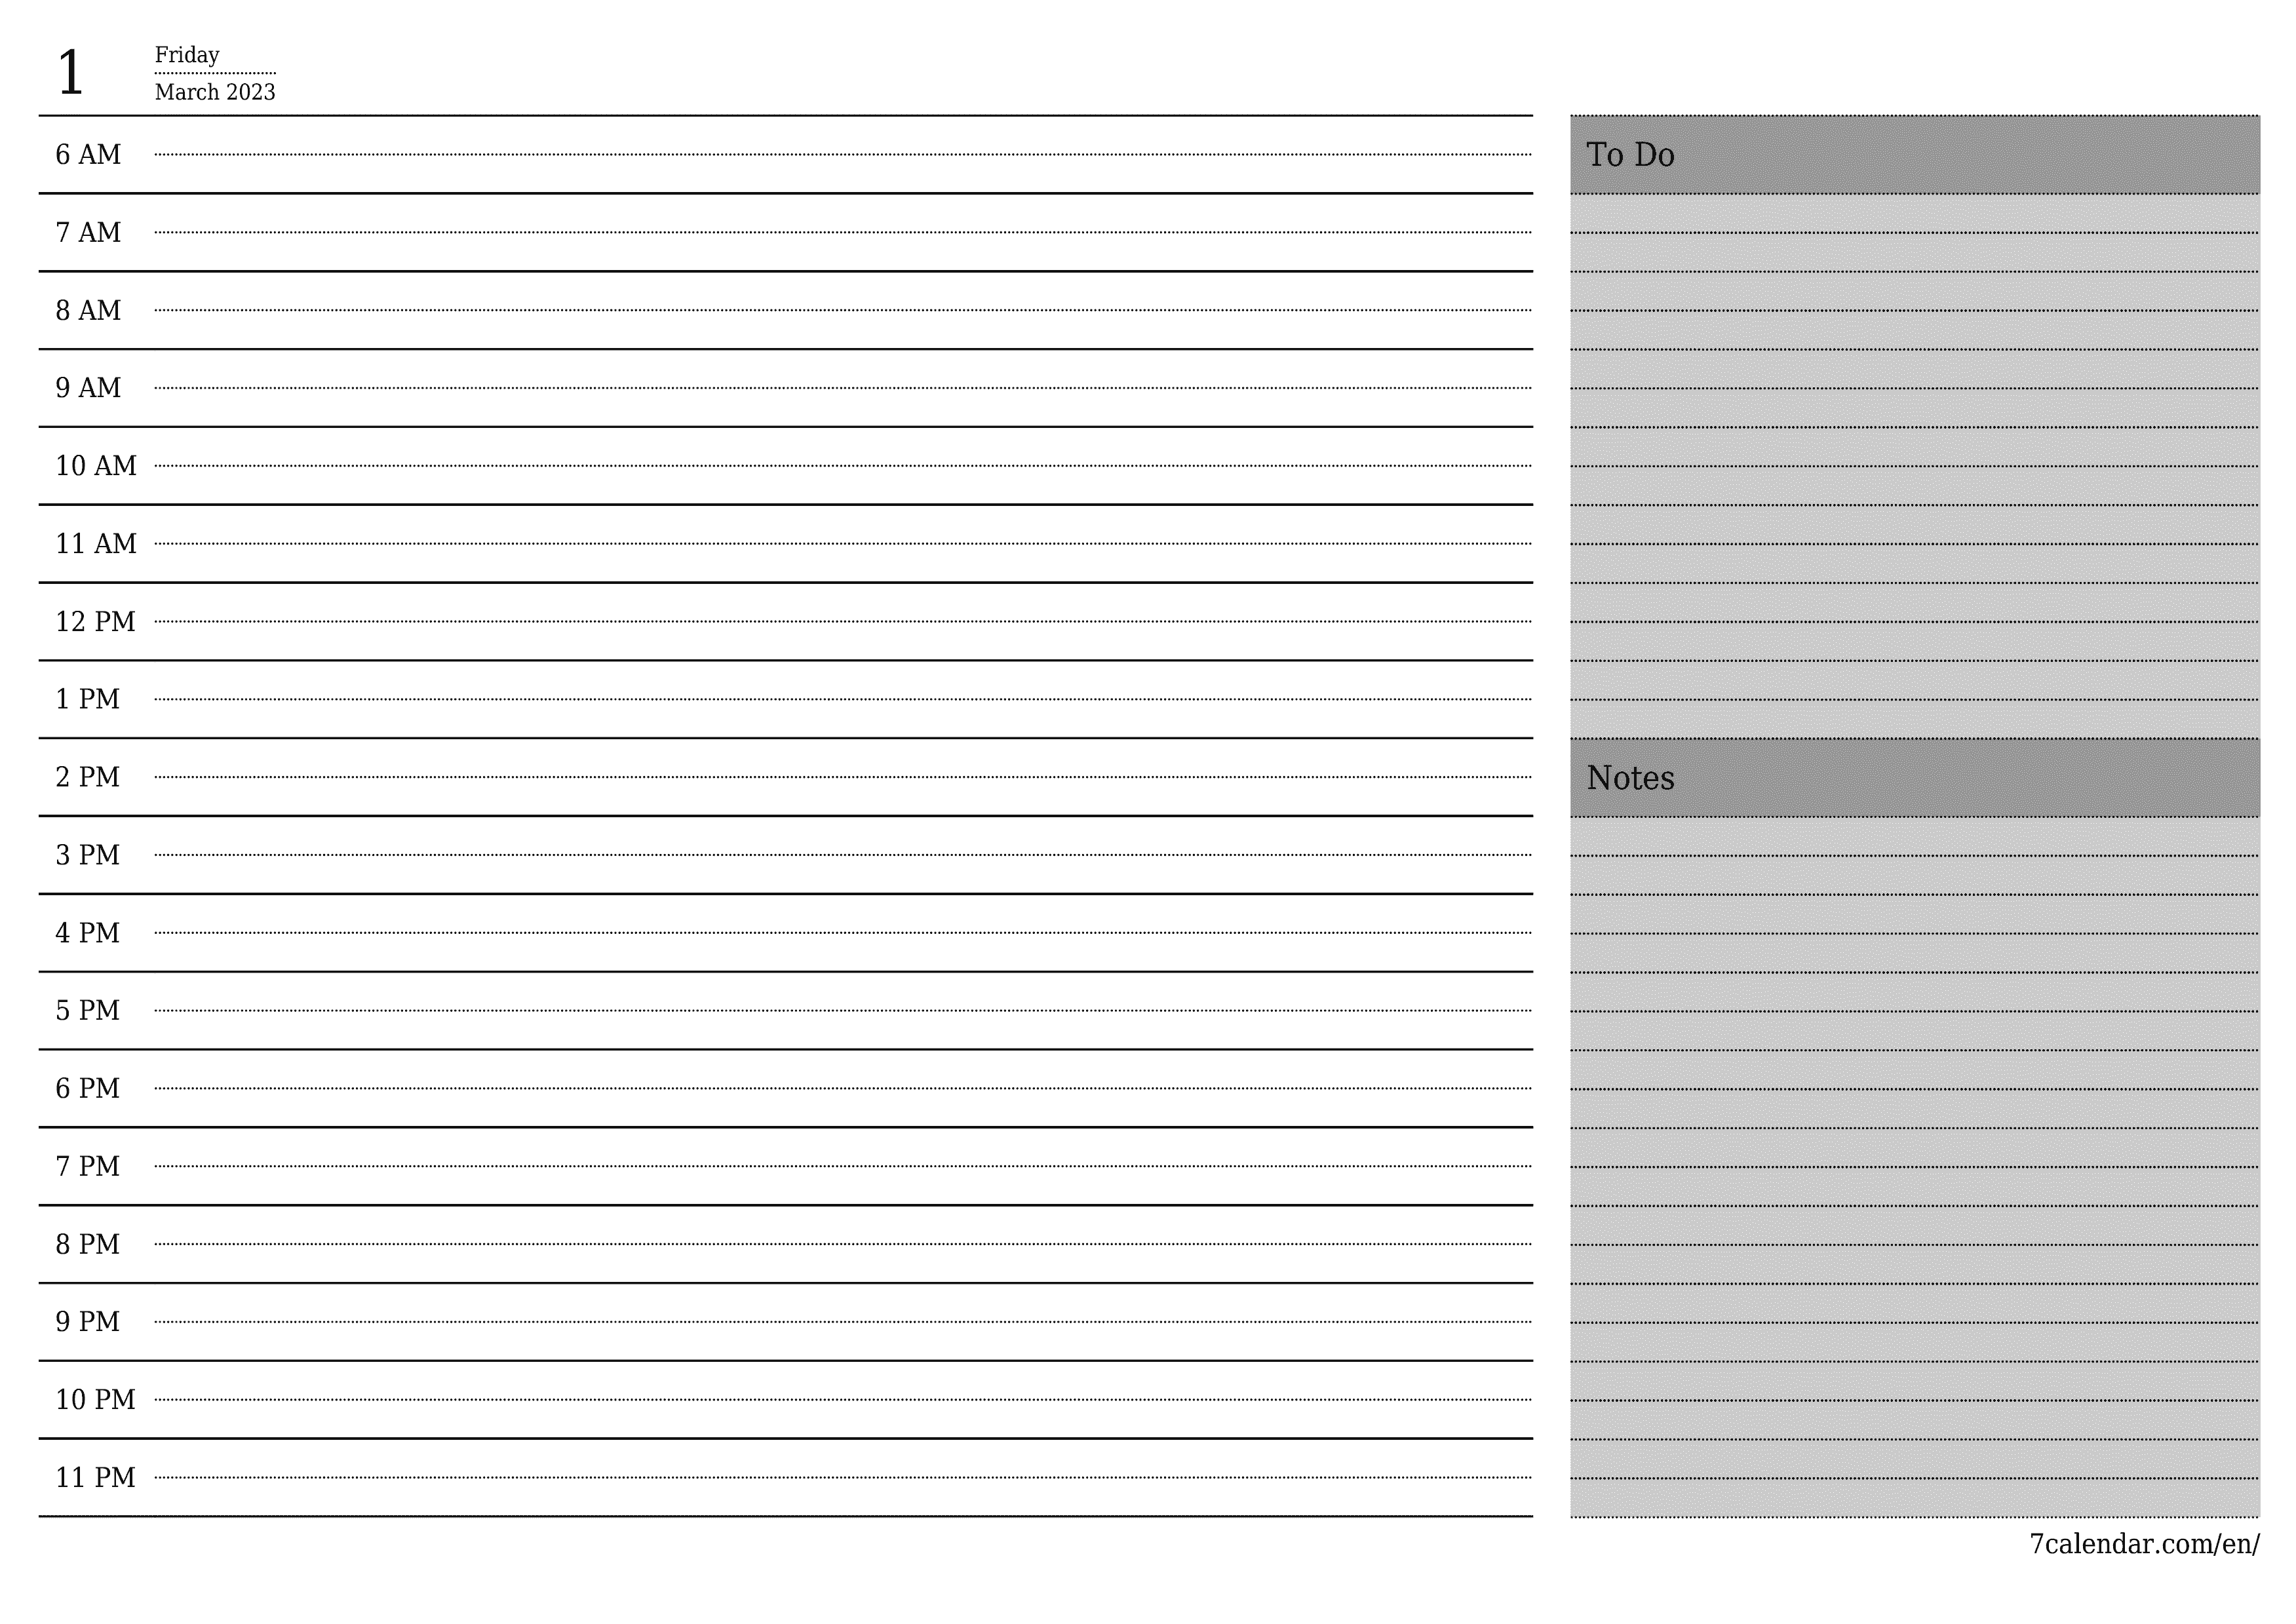 Blank daily calendar planner for day March 2023 with notes, save and print to PDF PNG English - 7calendar.com